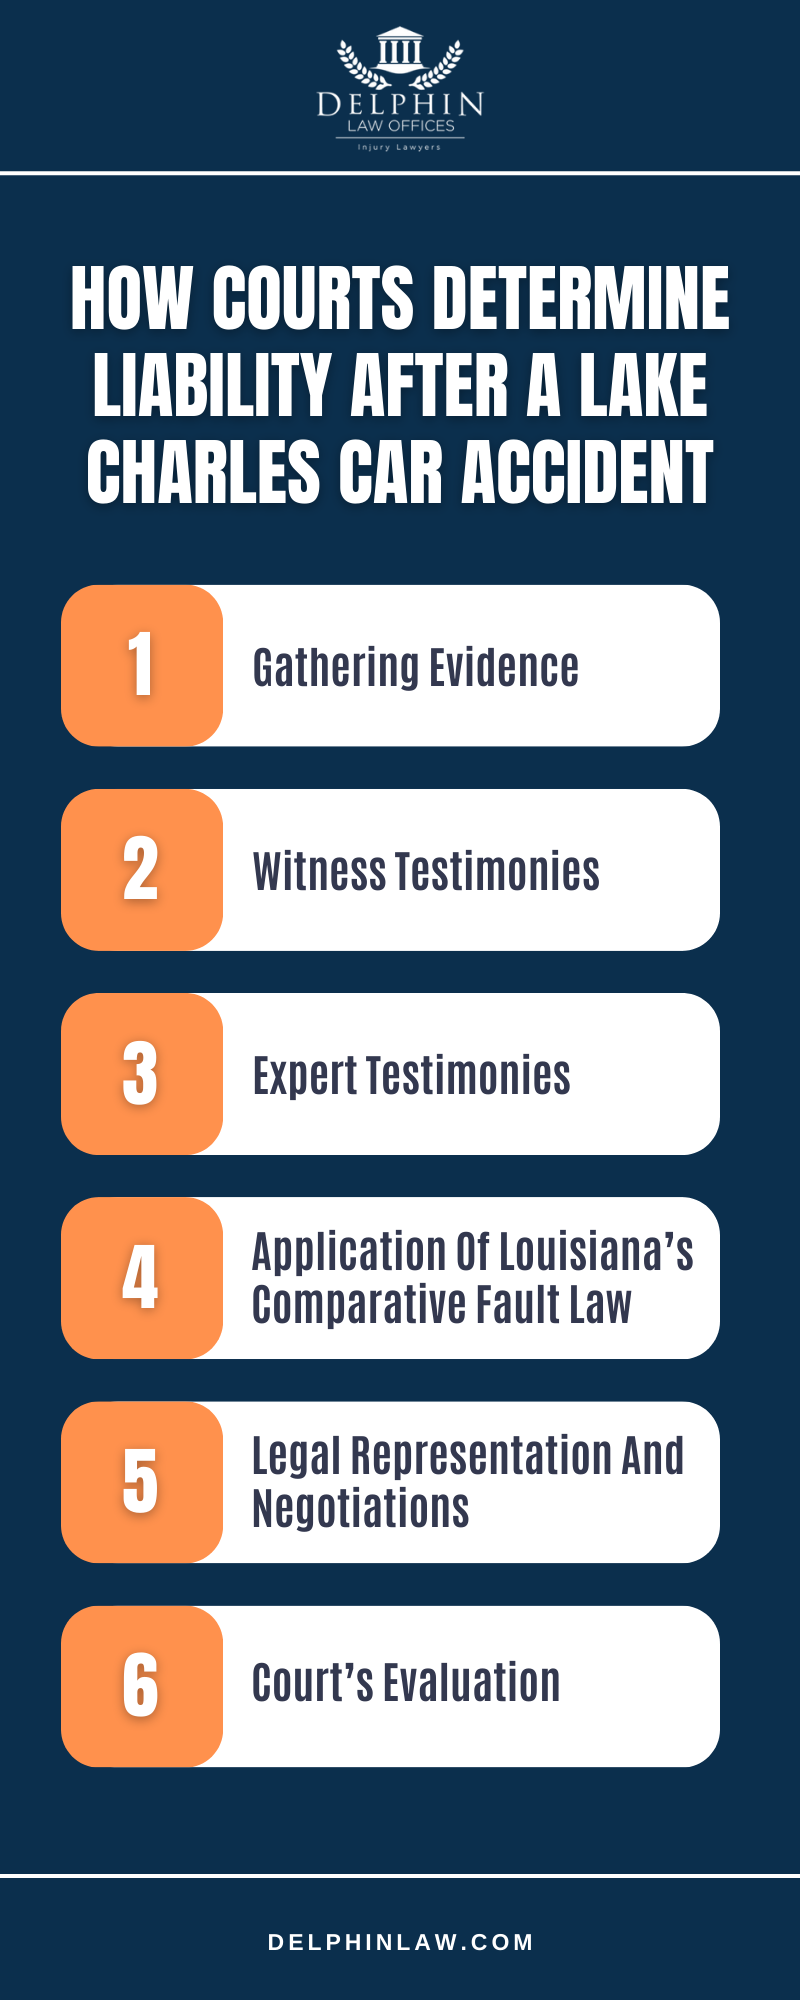 How Courts Determine Liability After A Lake Charles Car Accident Infographic